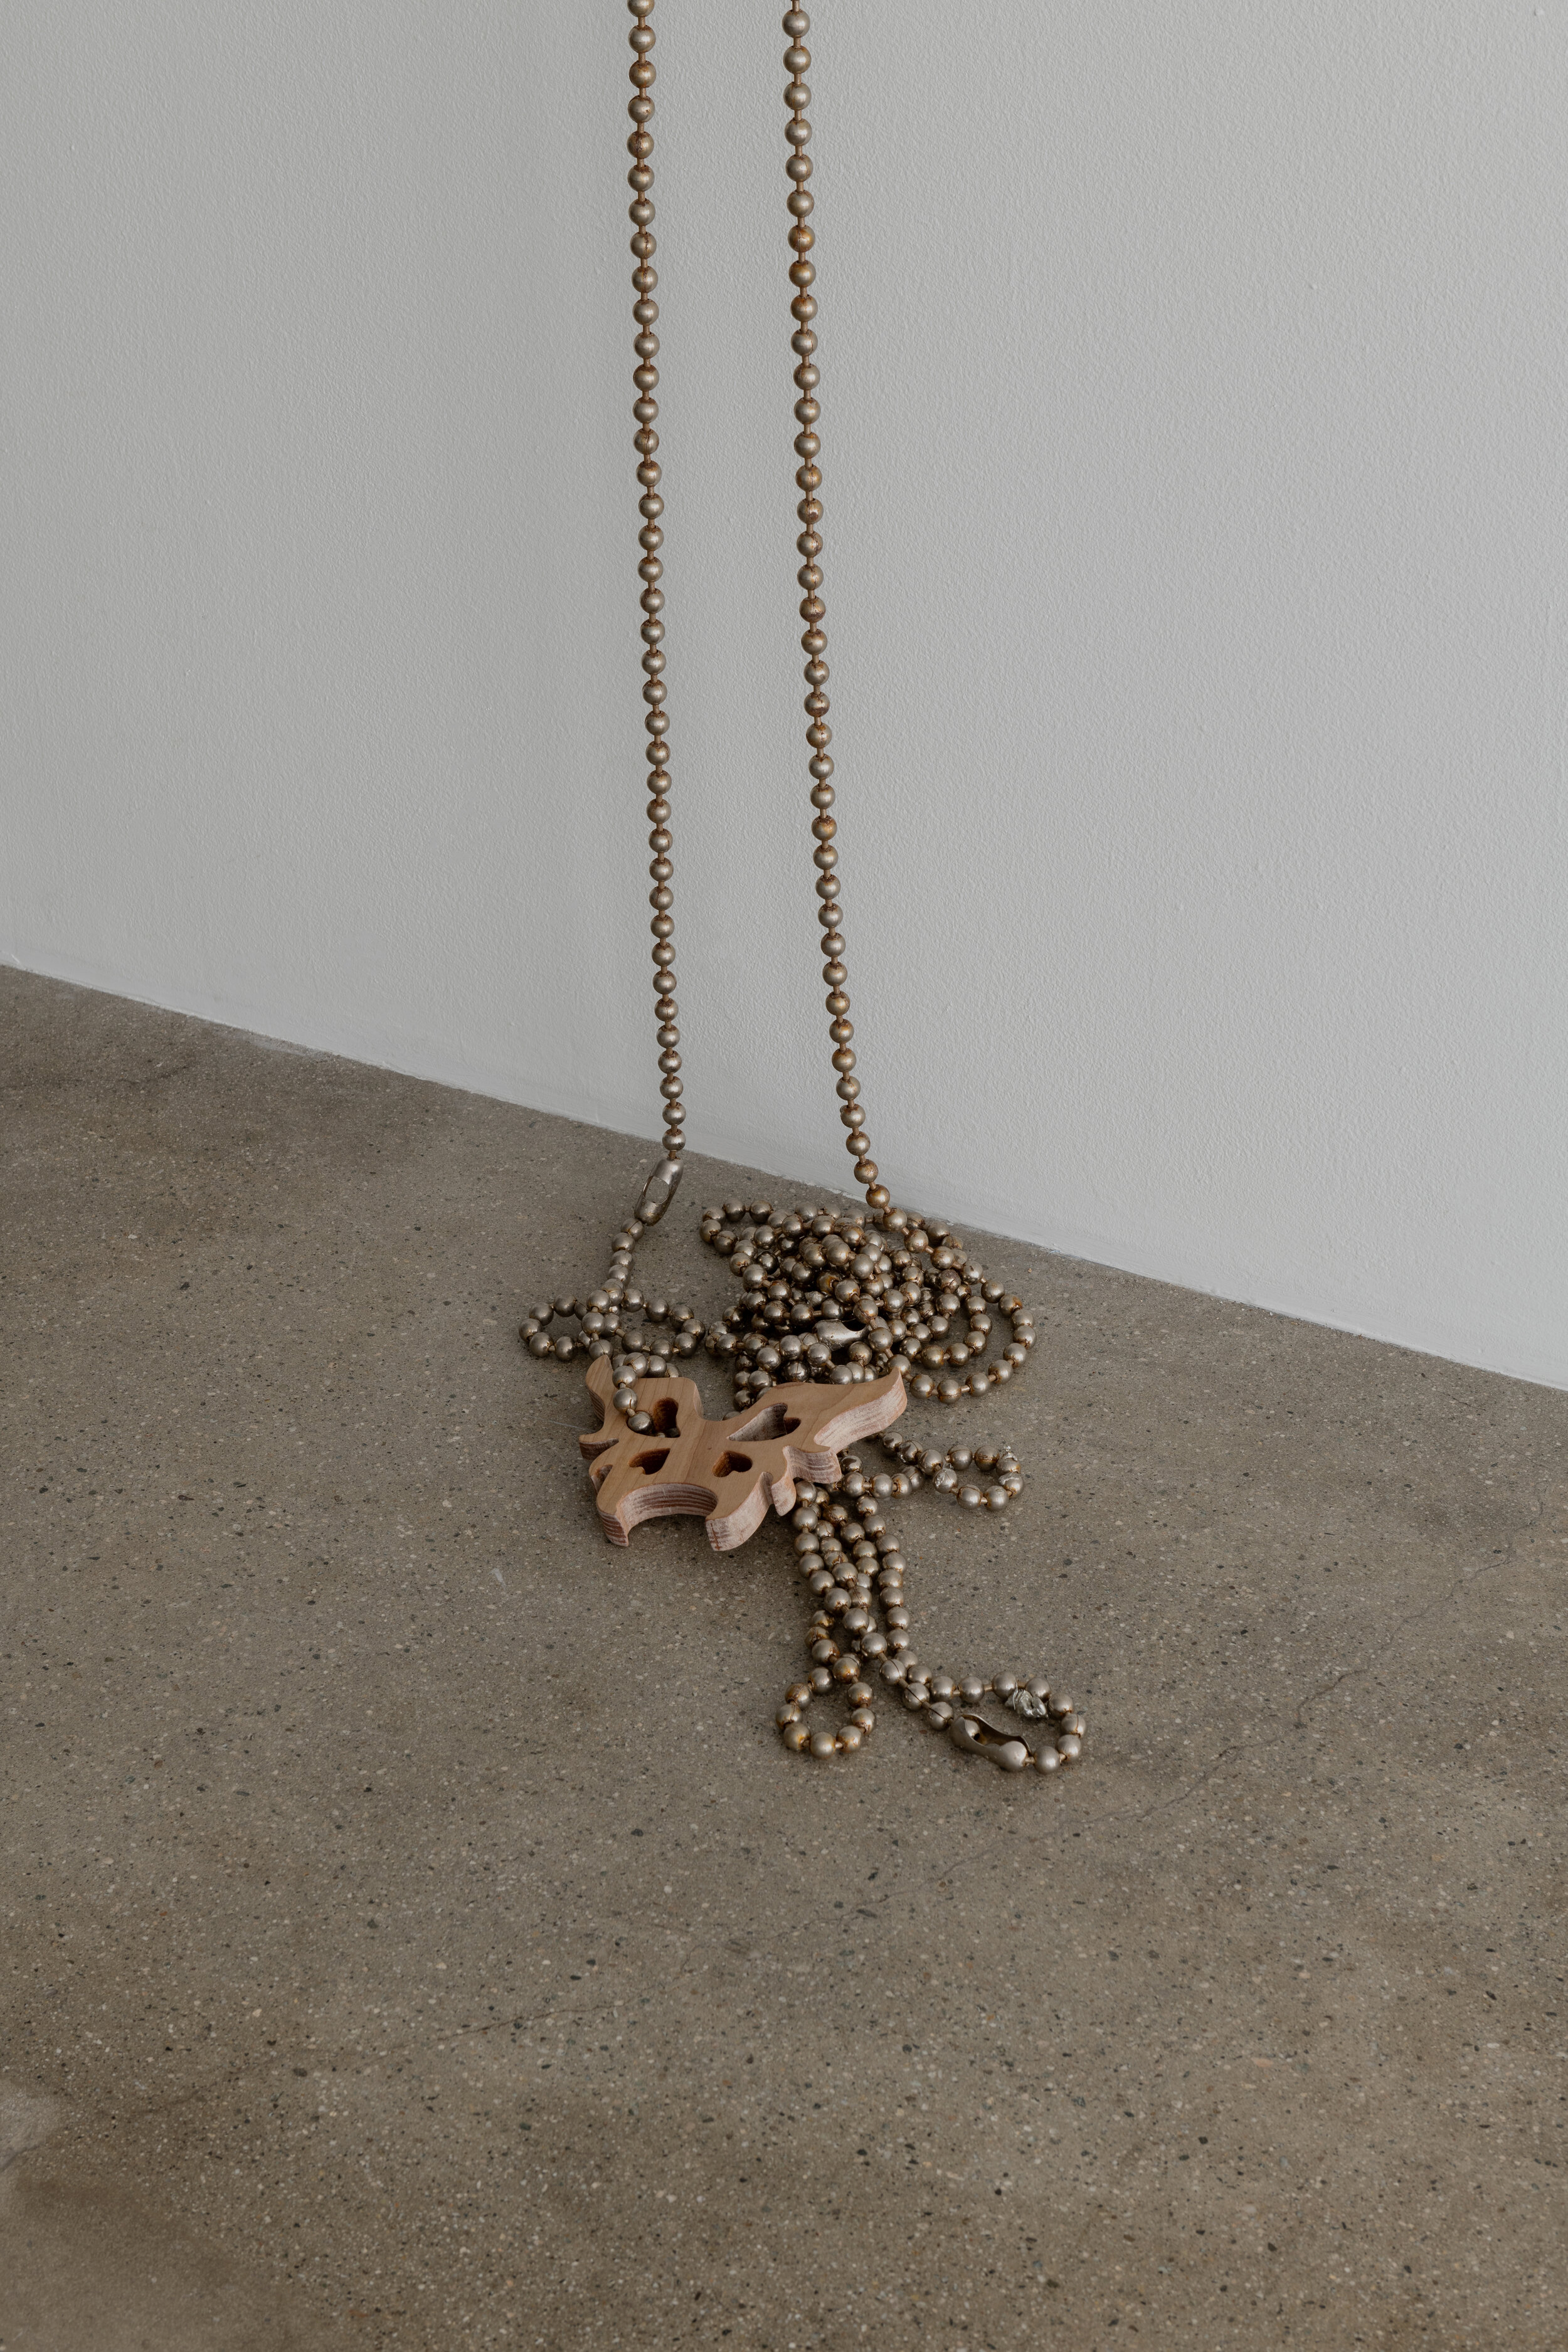  Detail view of   Sessa Englund   Single piercings with chain and butterflies (piercing series)  2021 Pine wood, stainless steel chain necklace, rust, alloy dust, cast resin 